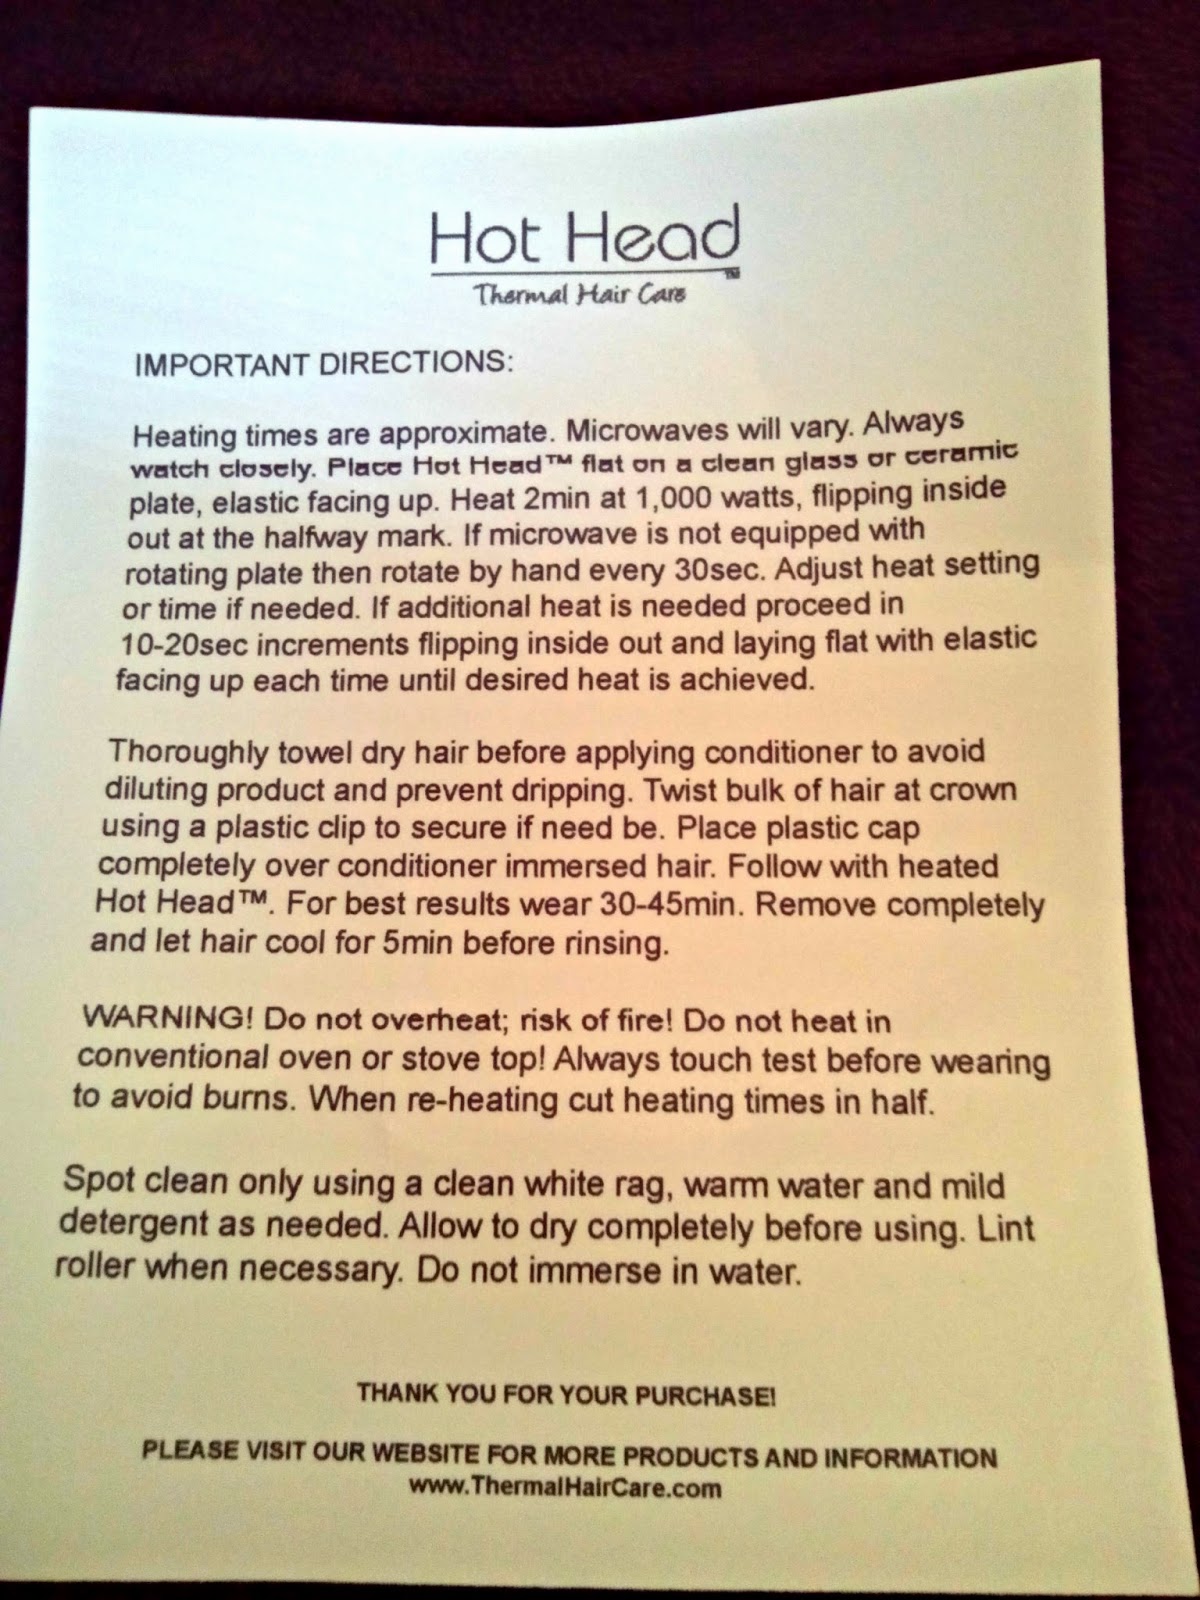 Hot Head, Thermal Hair Care, hair care, Microwavable, Deep Conditioning Cap, hair product Review,